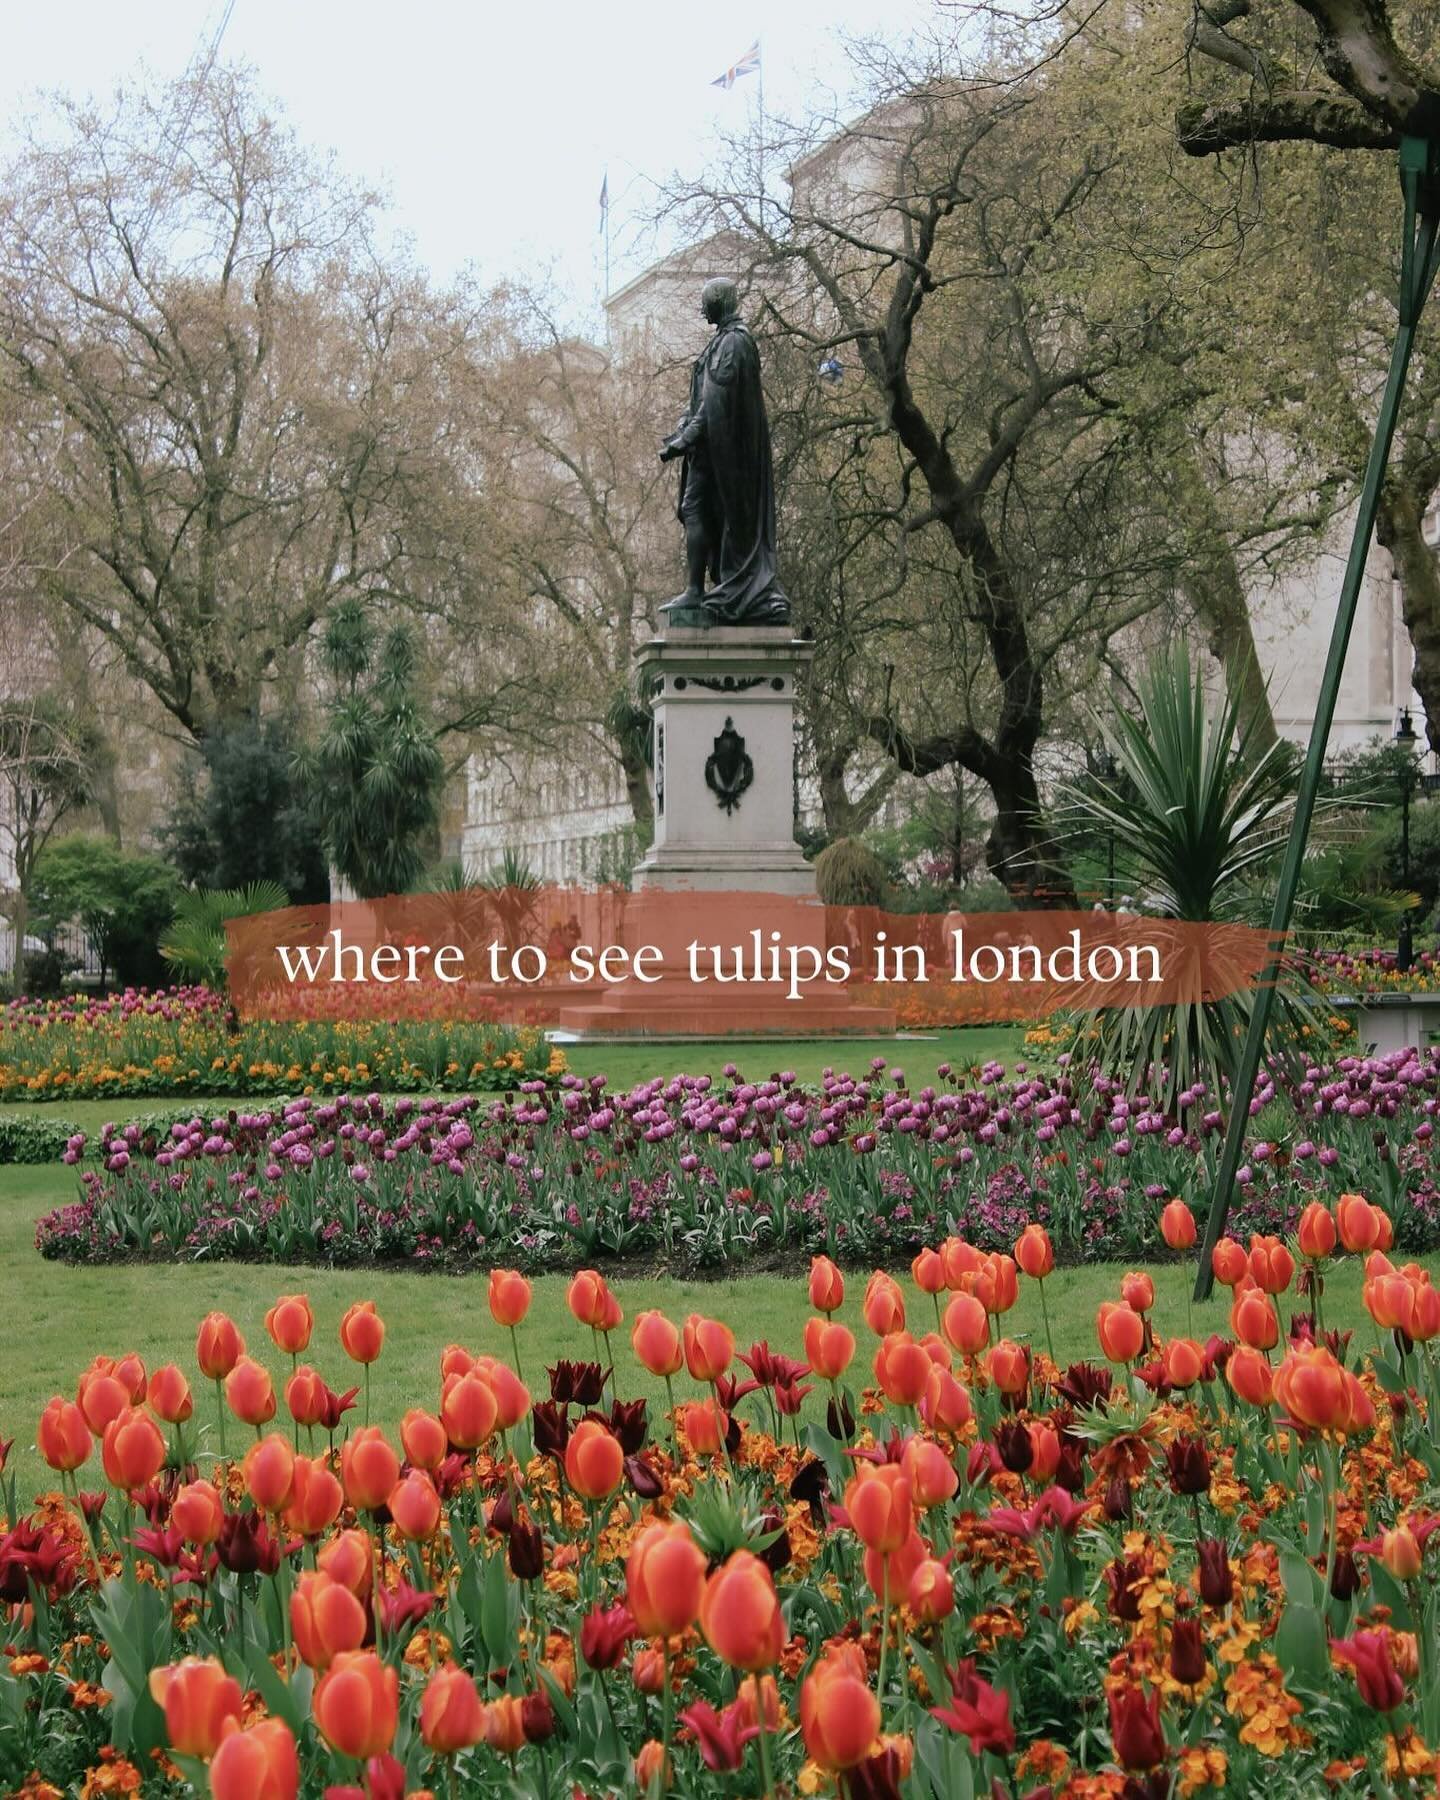 Tulip time is here, and I have traversed London and the South East for the best tulip gardens over the last several years. Here are my favourite spots to see tulips in London:
🌷Victoria Embankment Gardens
🌷Hampton Court Palace
🌷Cannizaro Park
🌷Ha